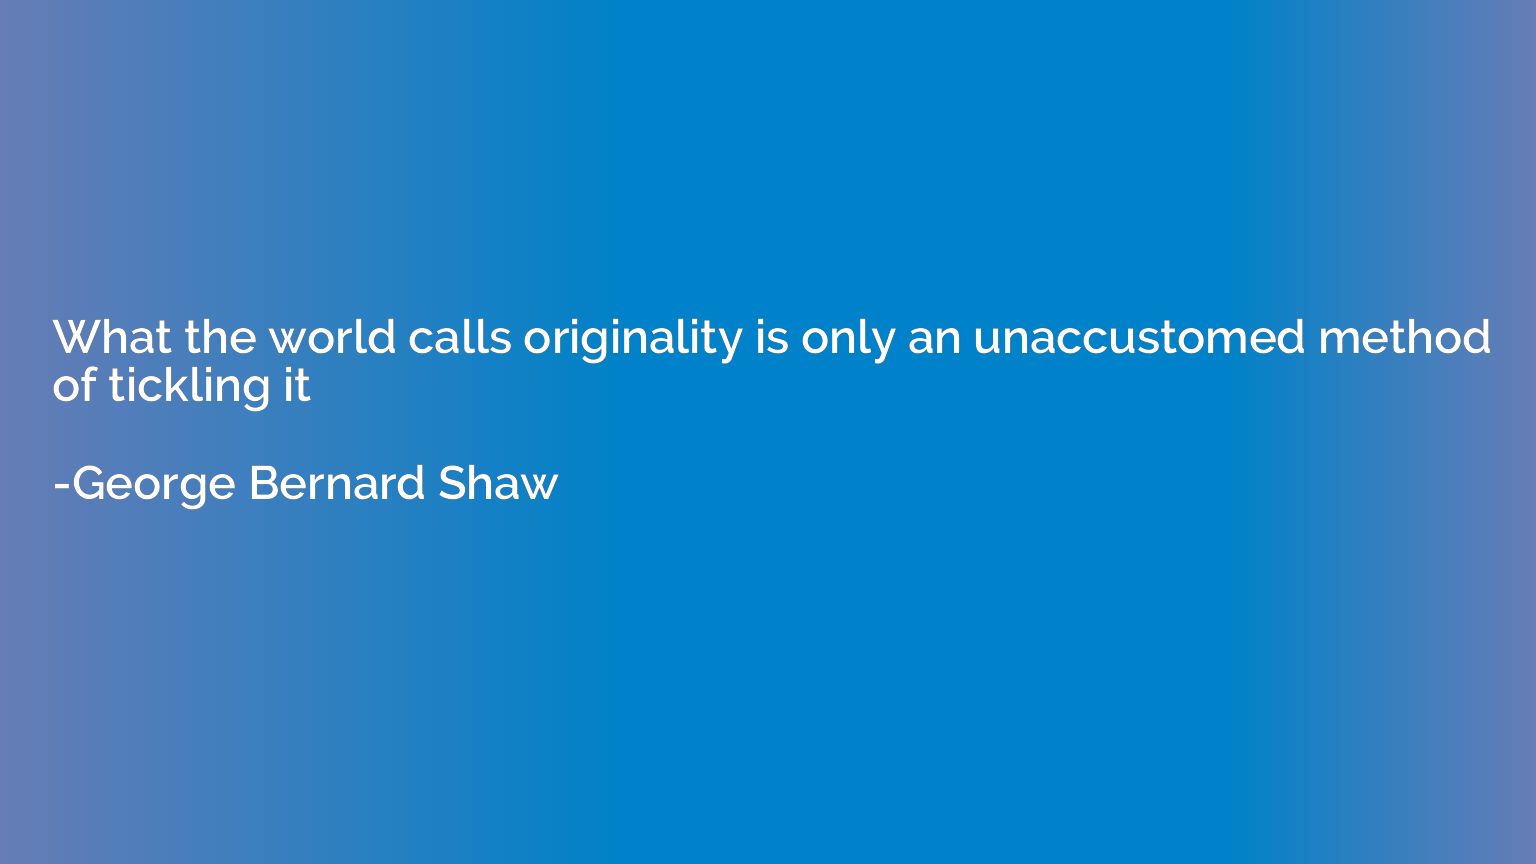 What the world calls originality is only an unaccustomed met